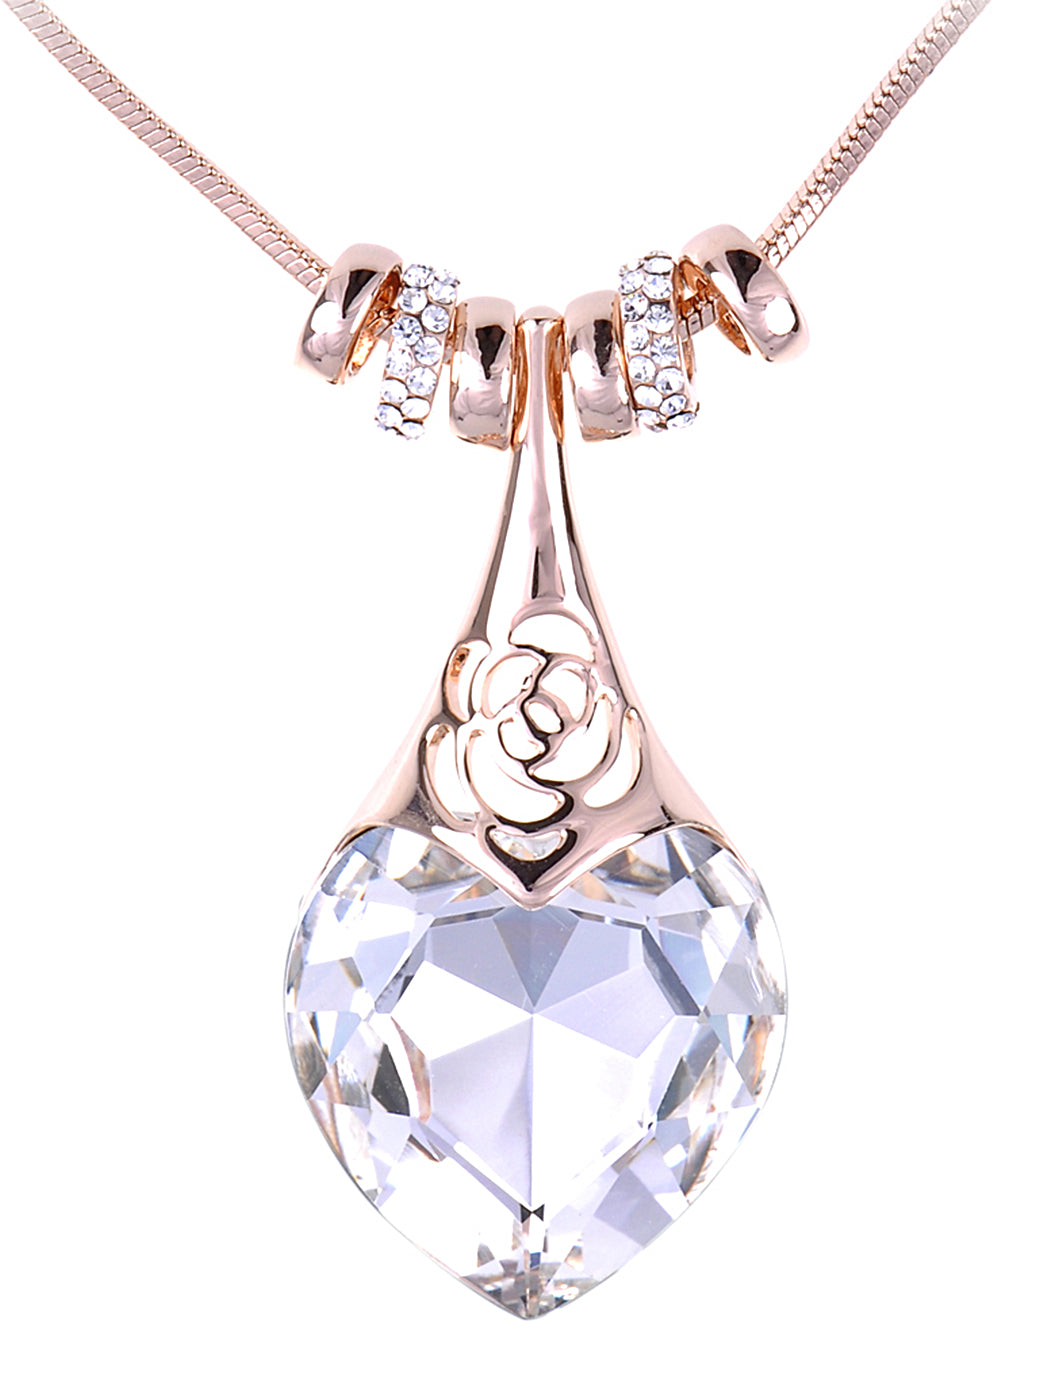 Rose Ringed Love Heart Floral Pendent Necklace